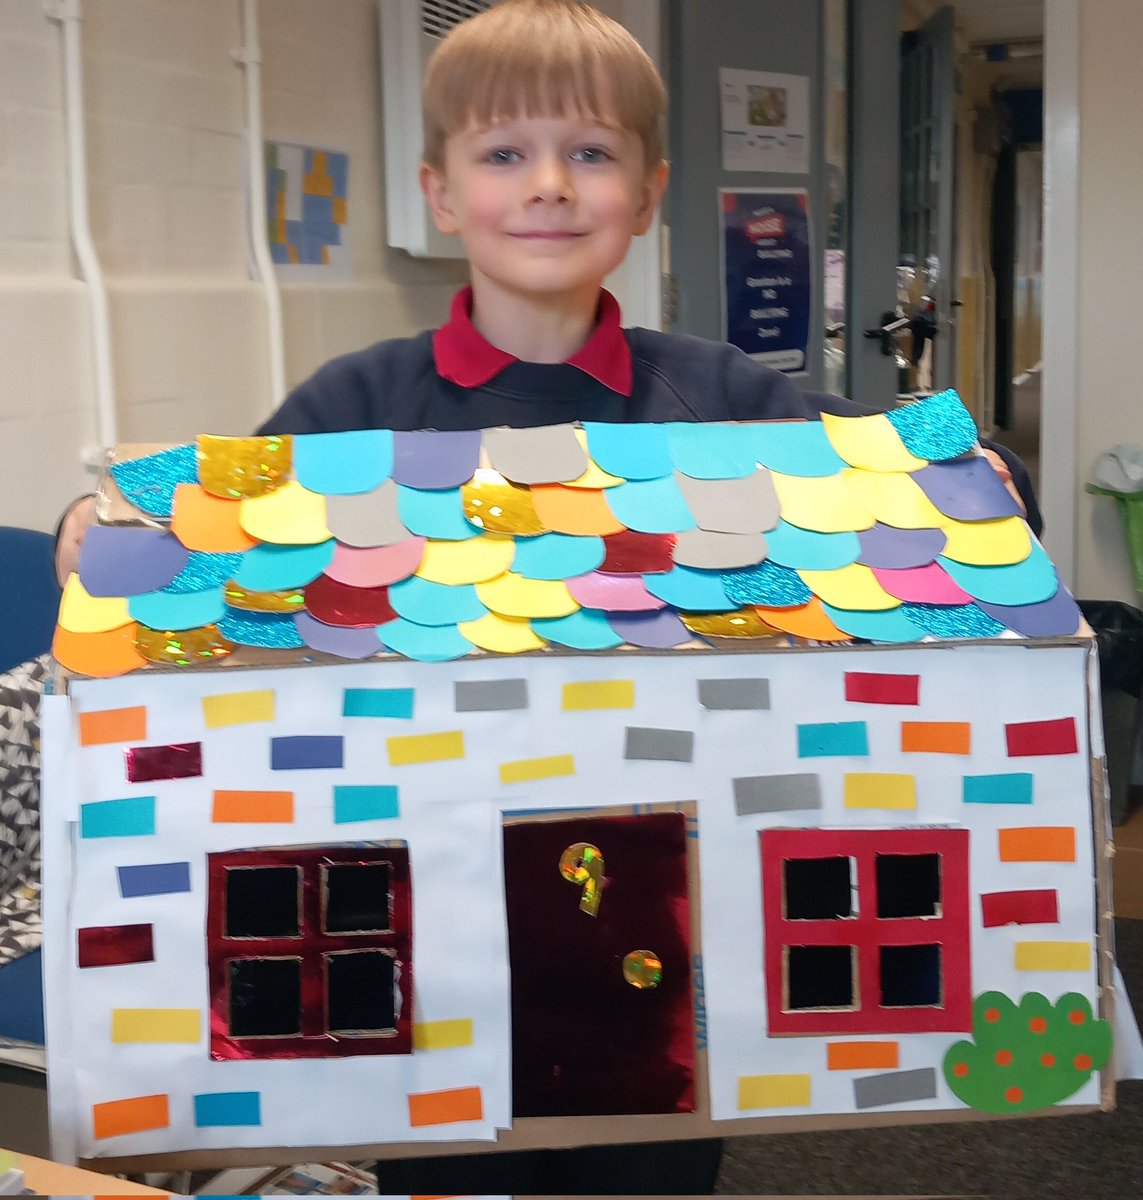 This young architect turned cardboard into a vibrant masterpiece - a colourful house! It even has furniture inside. #leadingtheway #grantonfamily #artsandcrafts #creativethinking